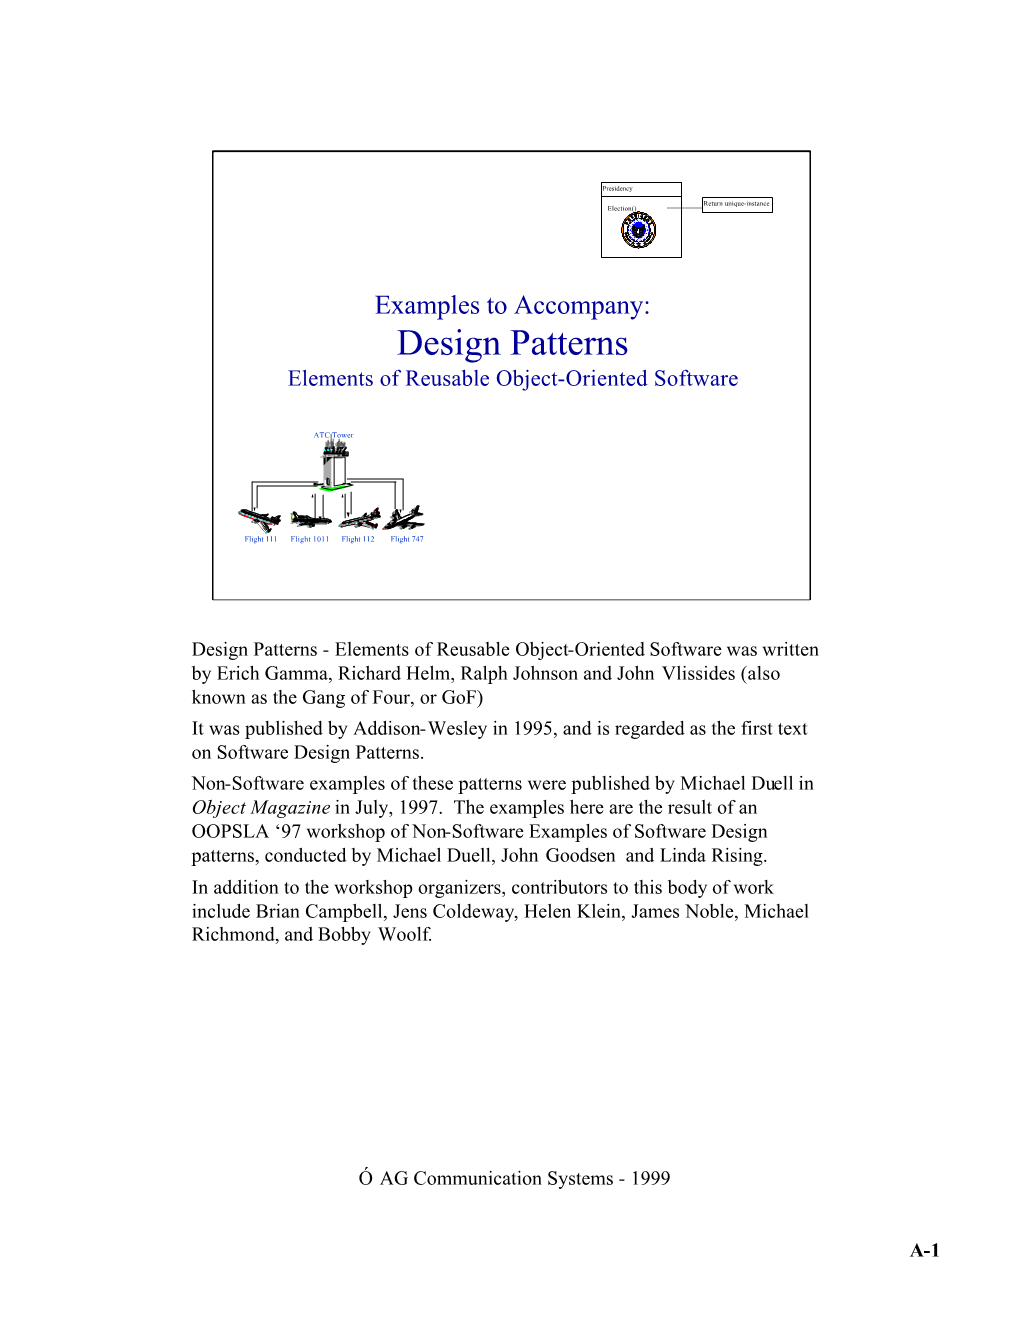 Examples to Accompany: Design Patterns Elements of Reusable Object-Oriented Software